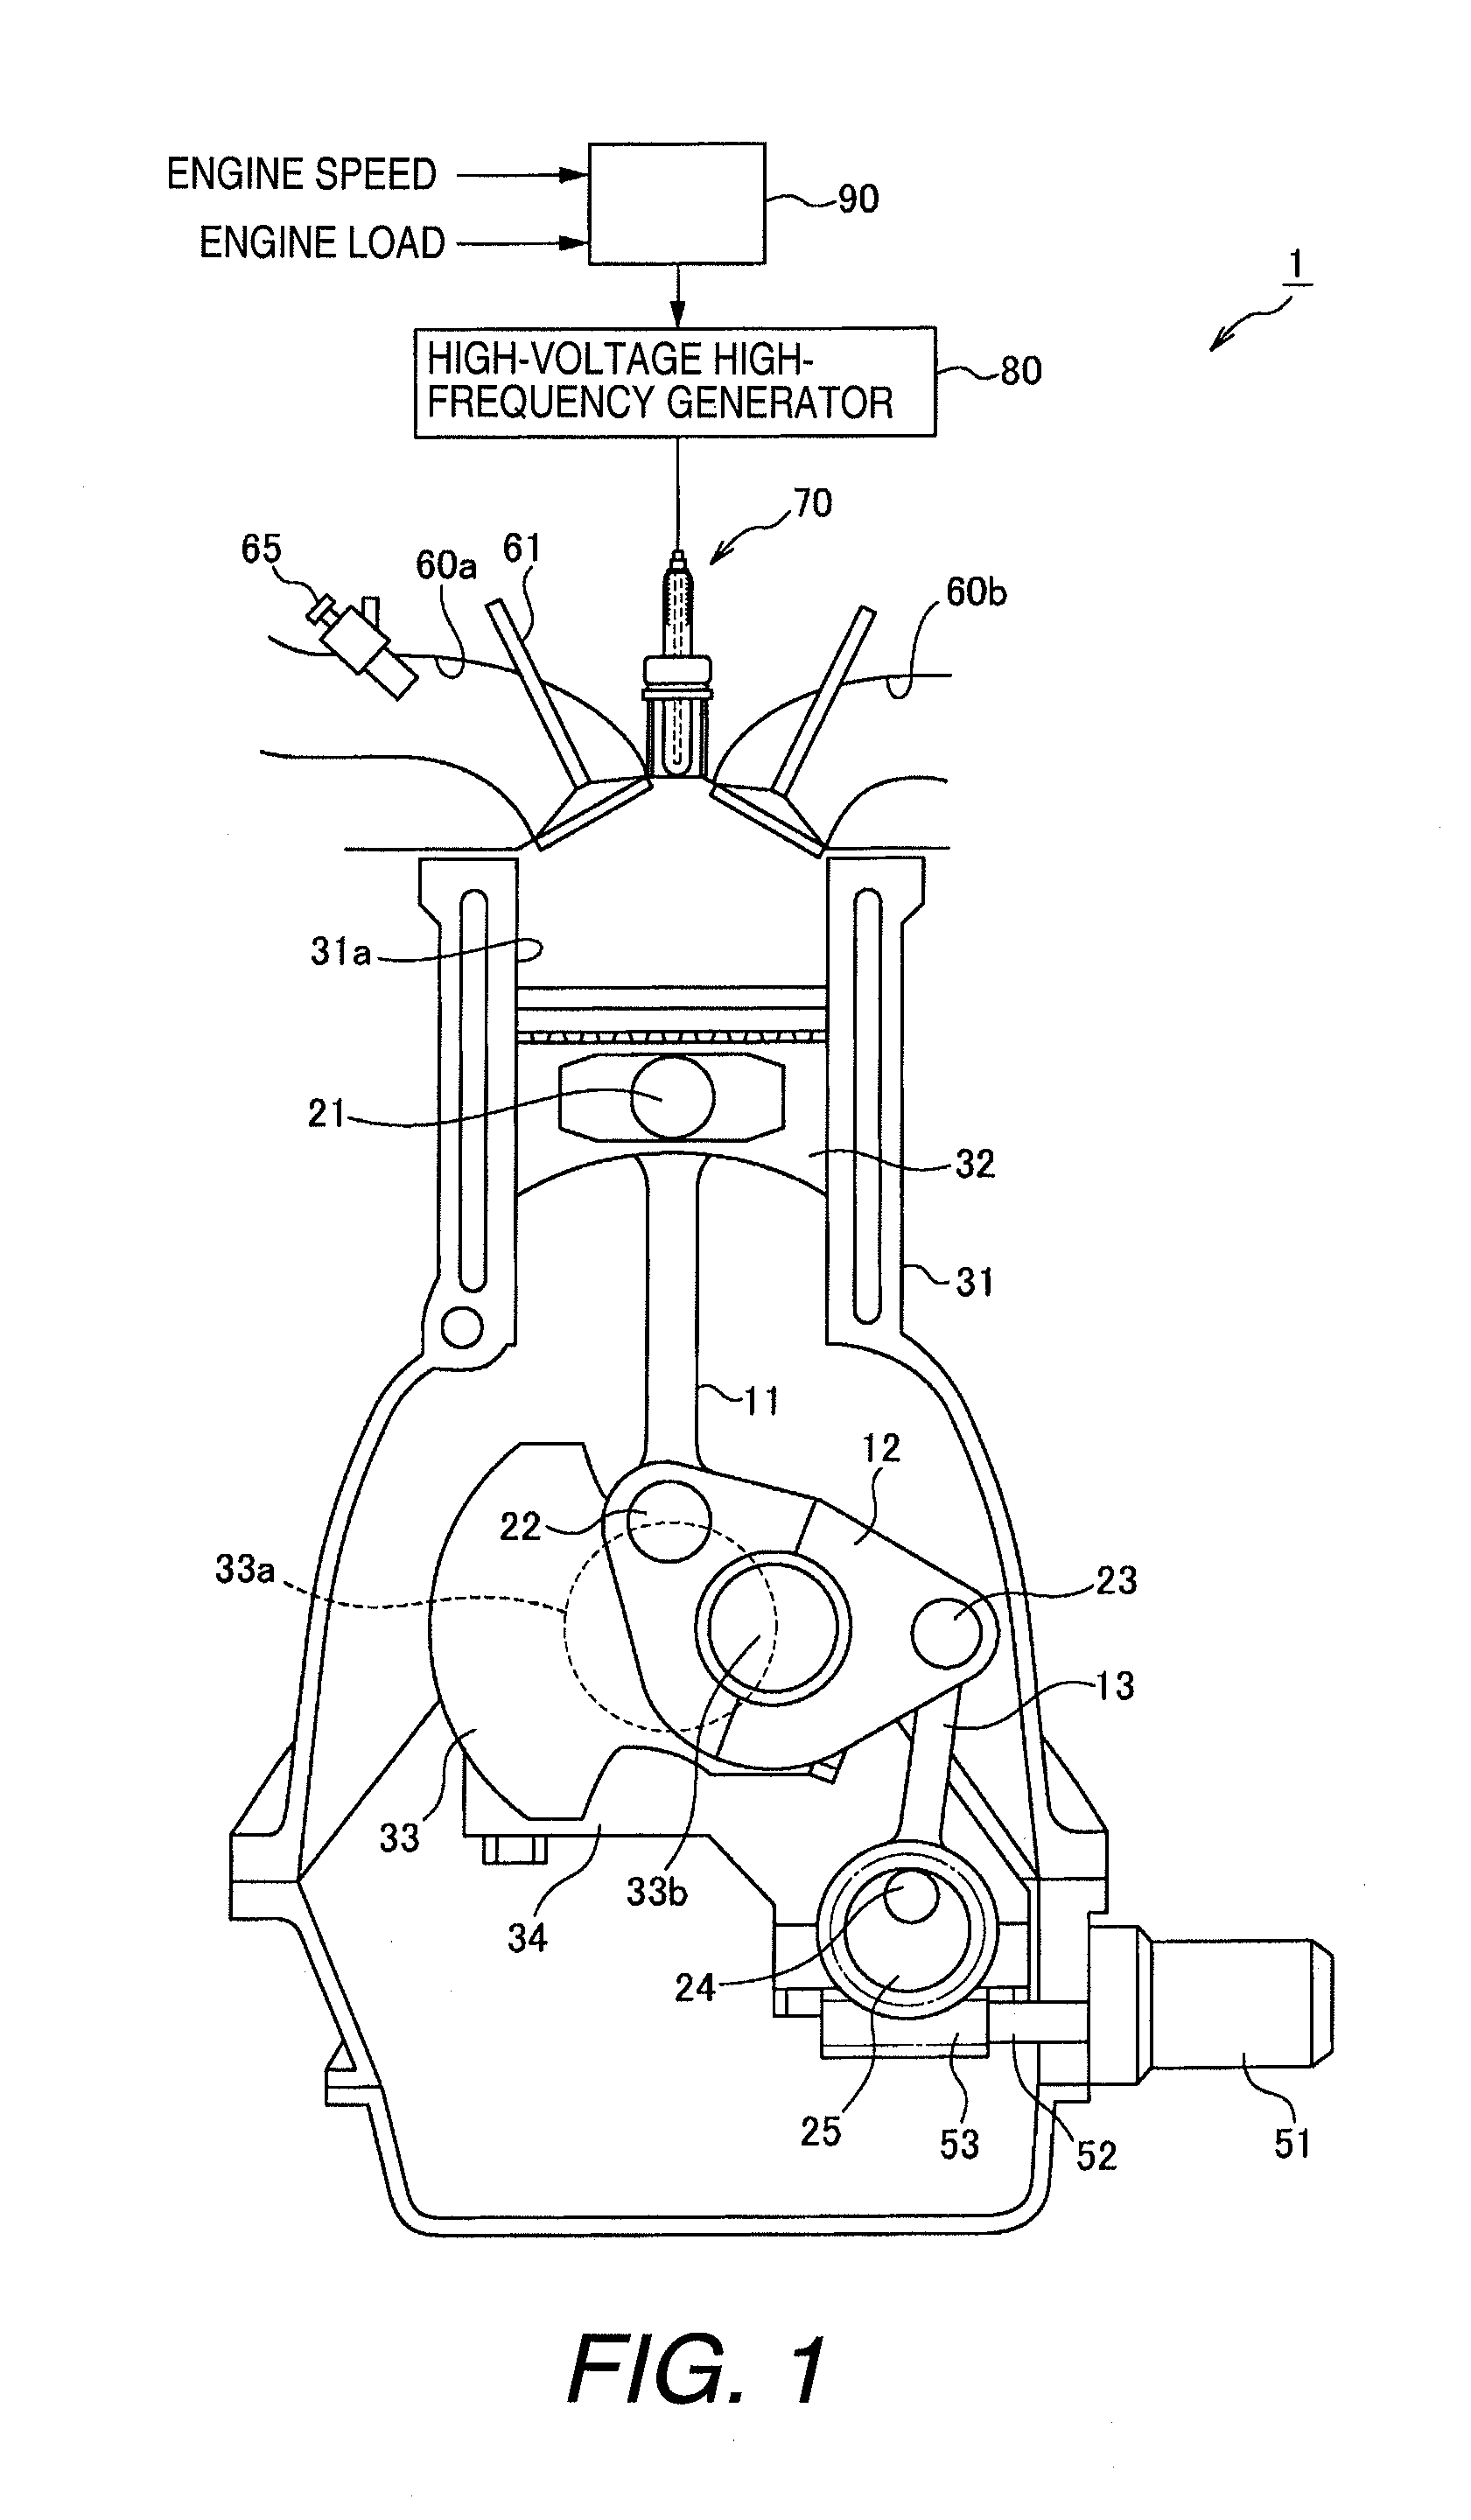 Internal combustion engine electric discharge structure